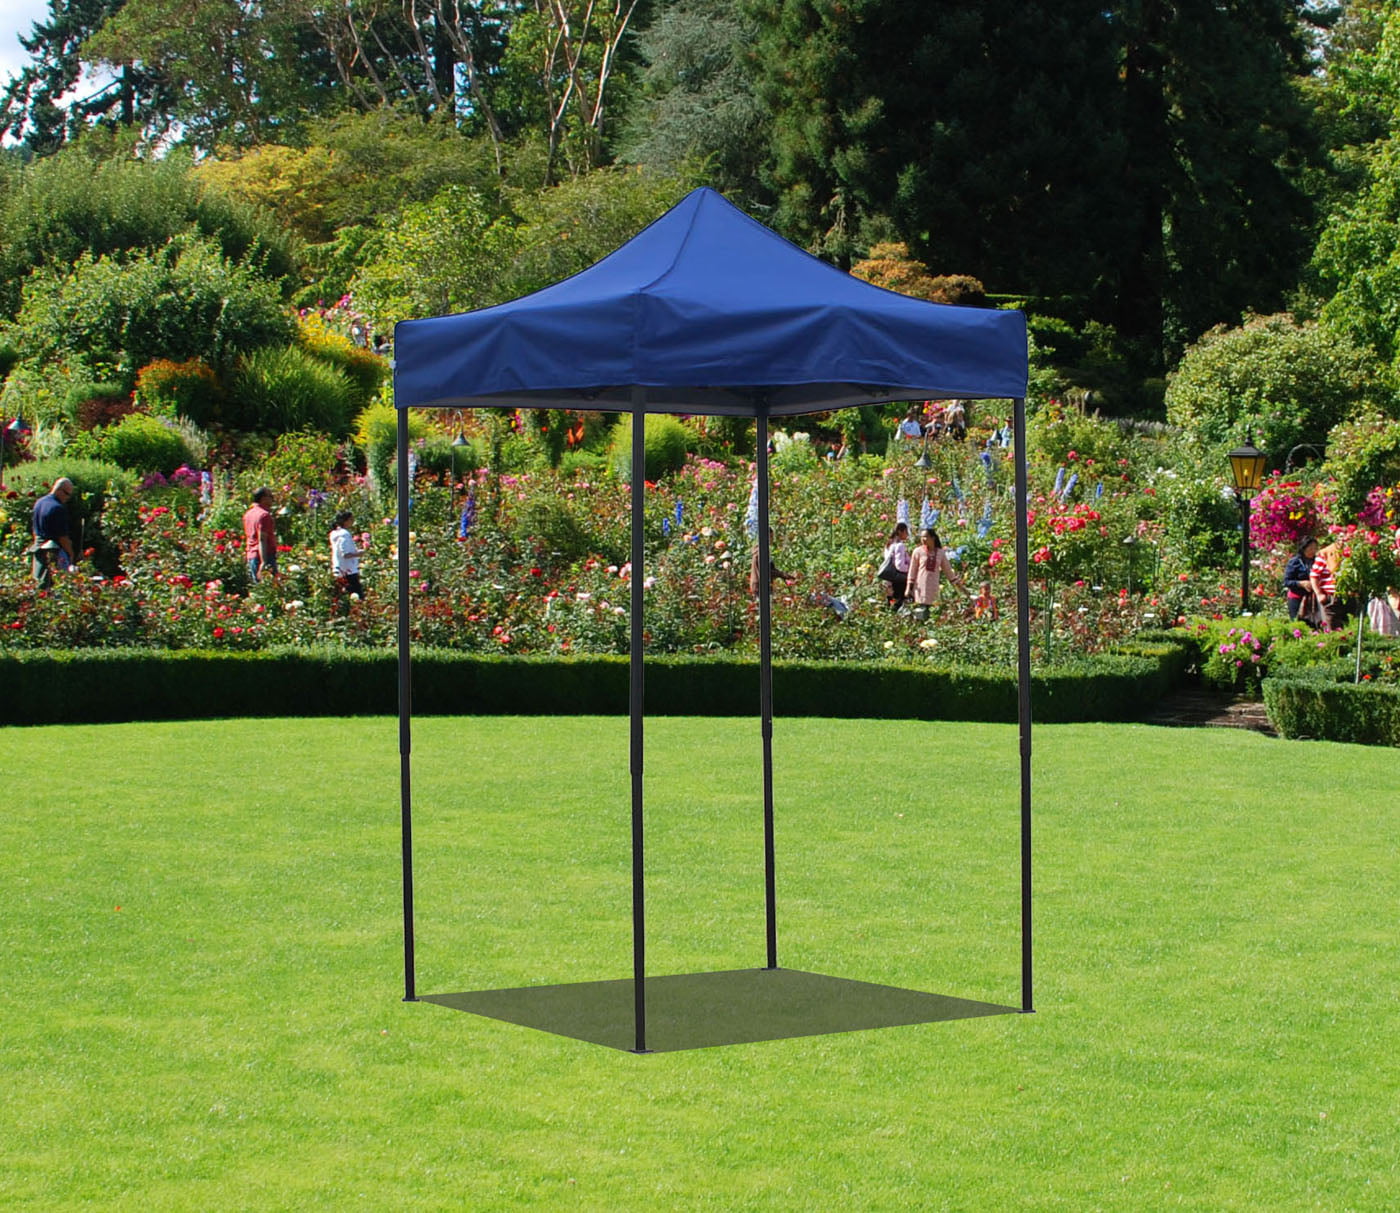 Canopy Ten 5 x 5 Commercial Fair Shelter Car Shelter Wedding Party Easy Pop Up 